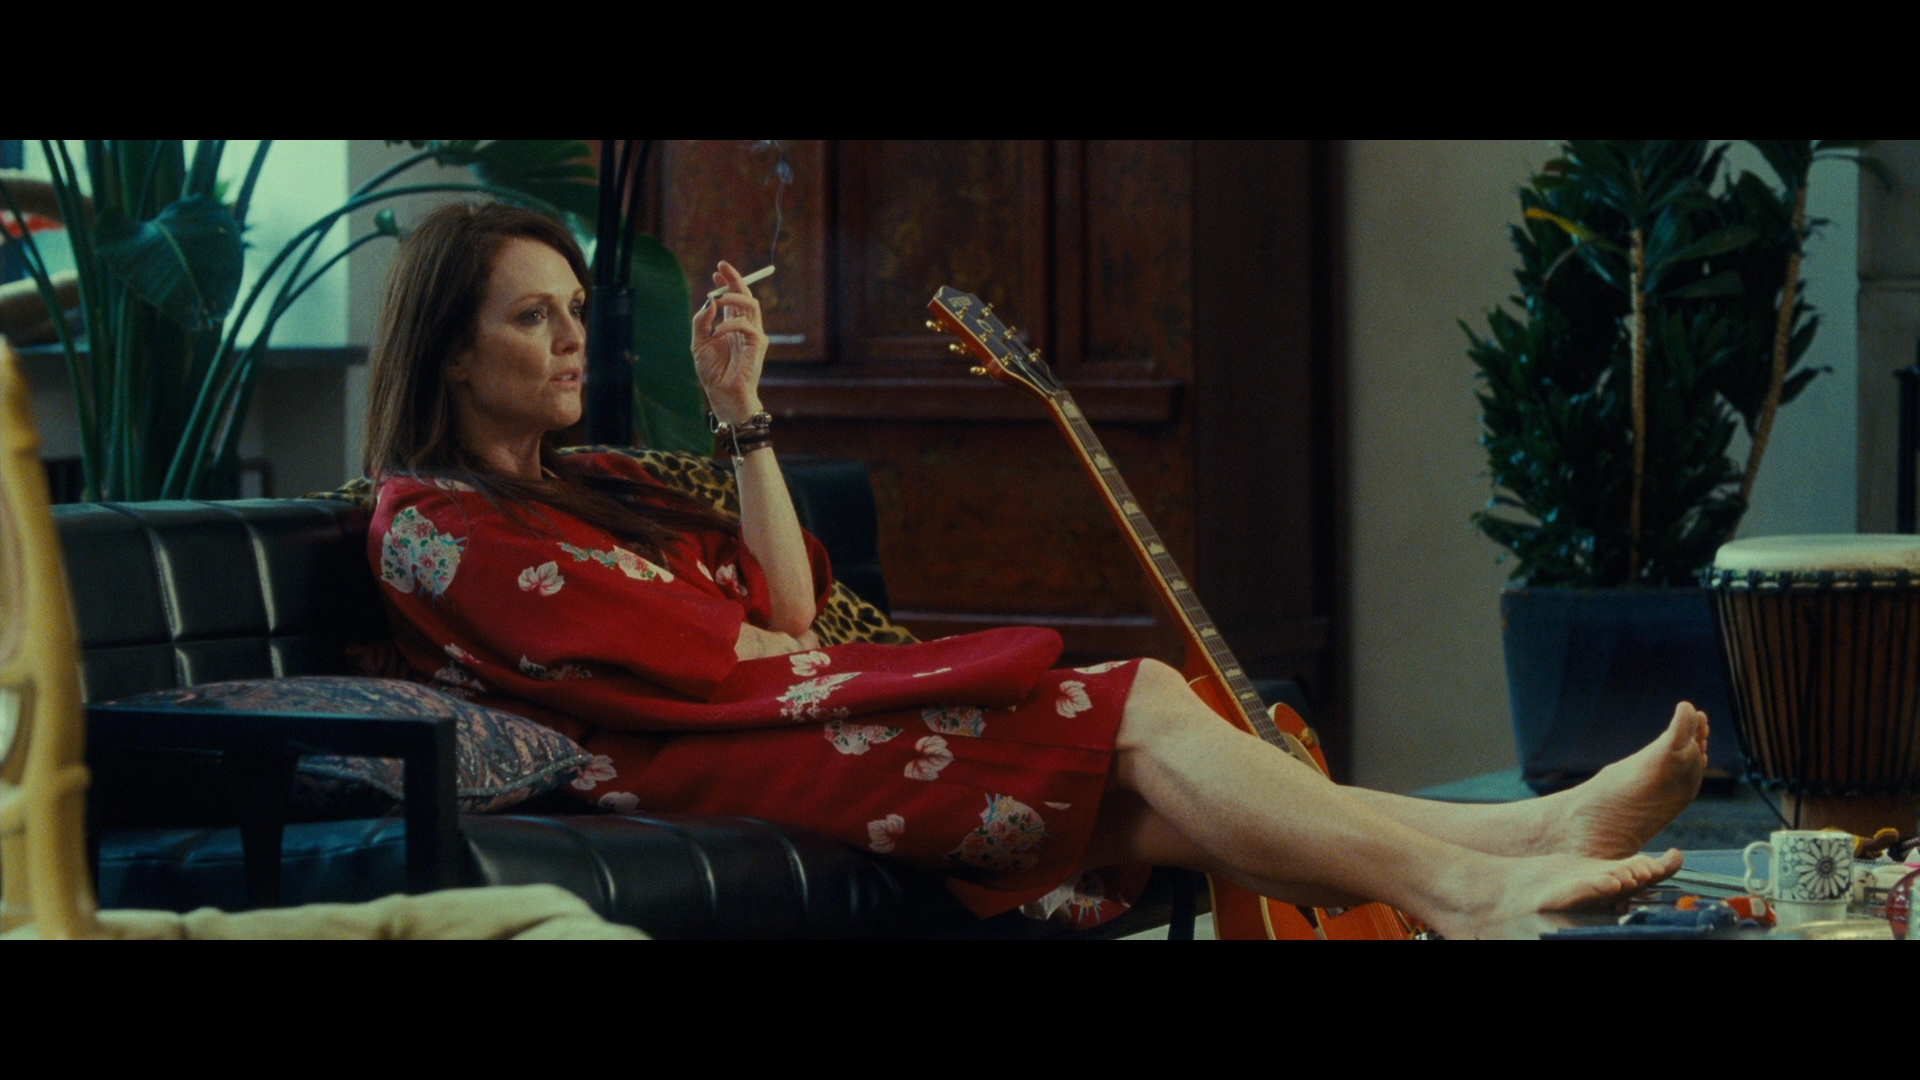 She'll stumble in on her mum (Julianne Moore) crying, get woken up by ...